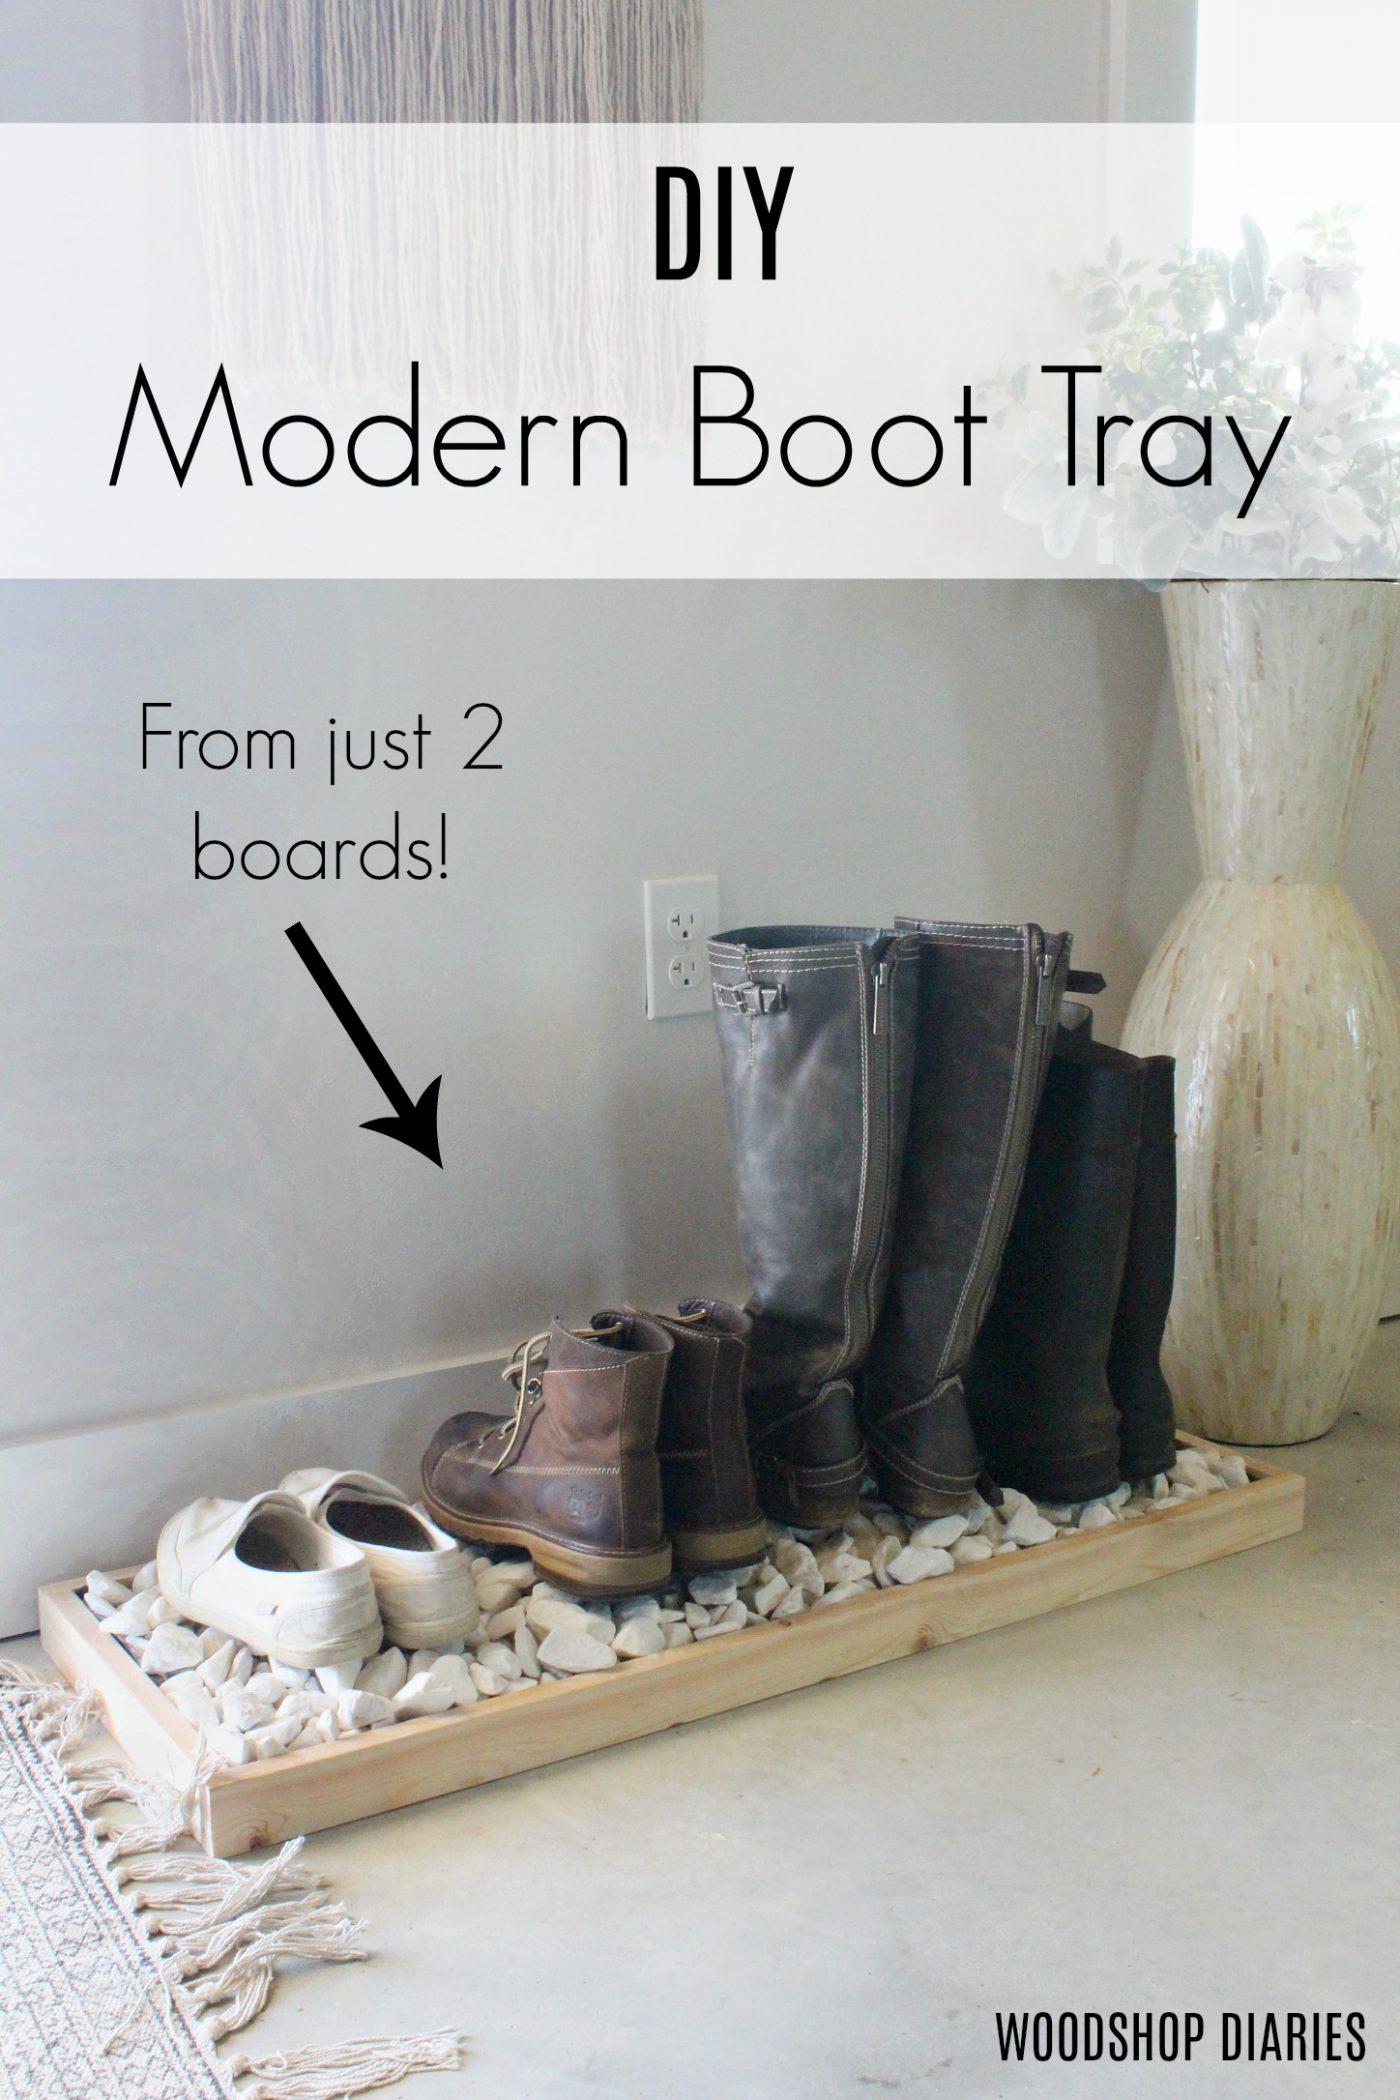 Wooden boot tray with white decorative rocks next to entryway door with text "DIY modern boot tray from just 2 boards"